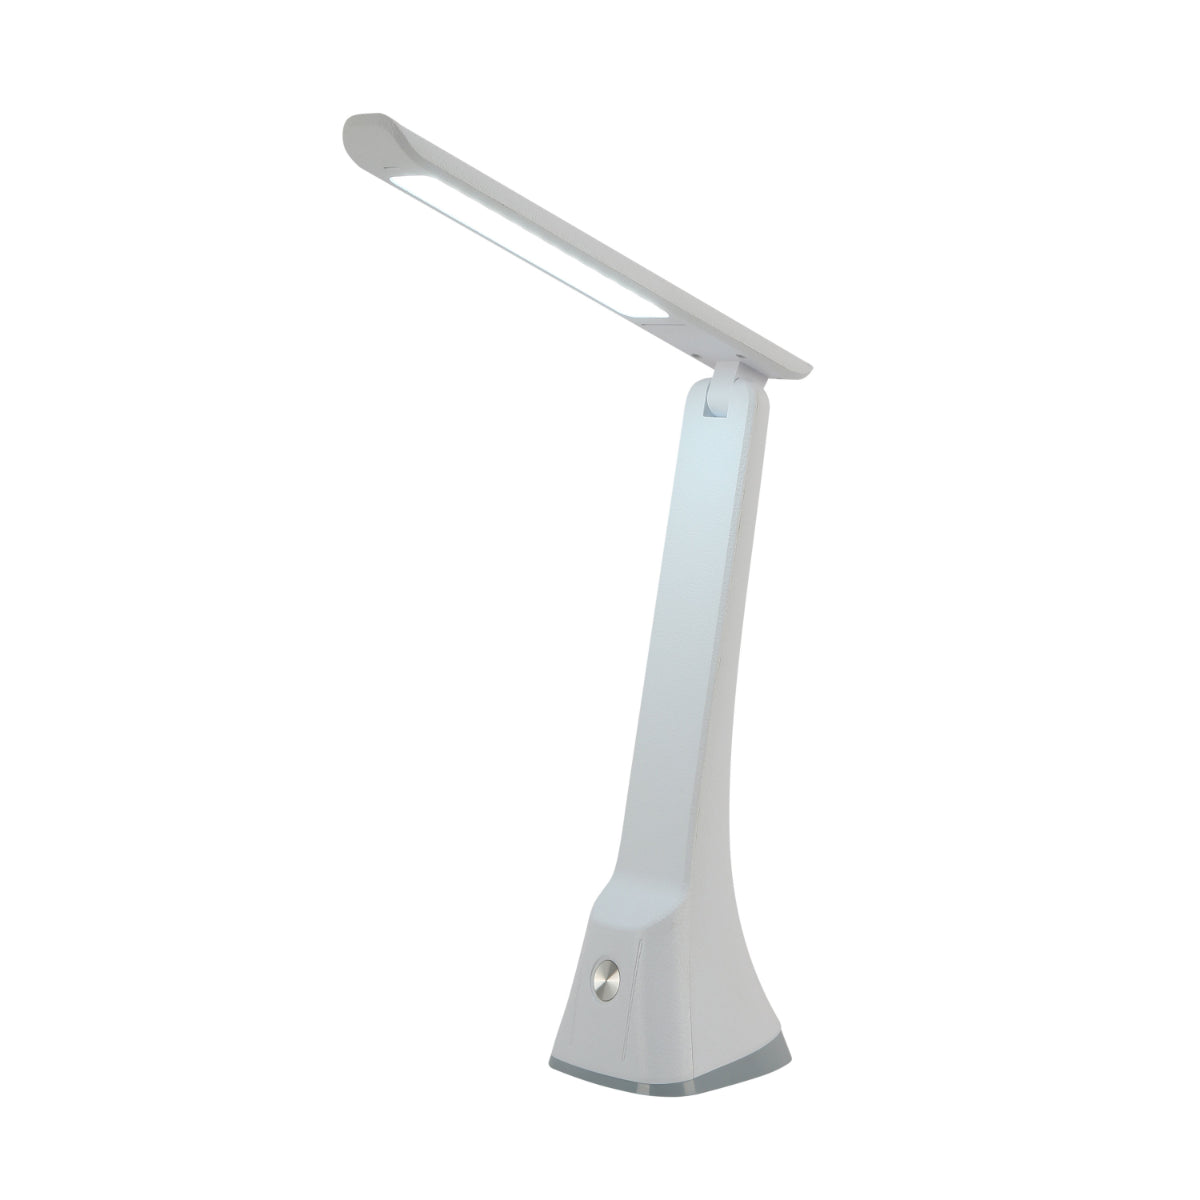 Main image of Sleek Foldable LED Desk Lamp with Touch Control 130-03762